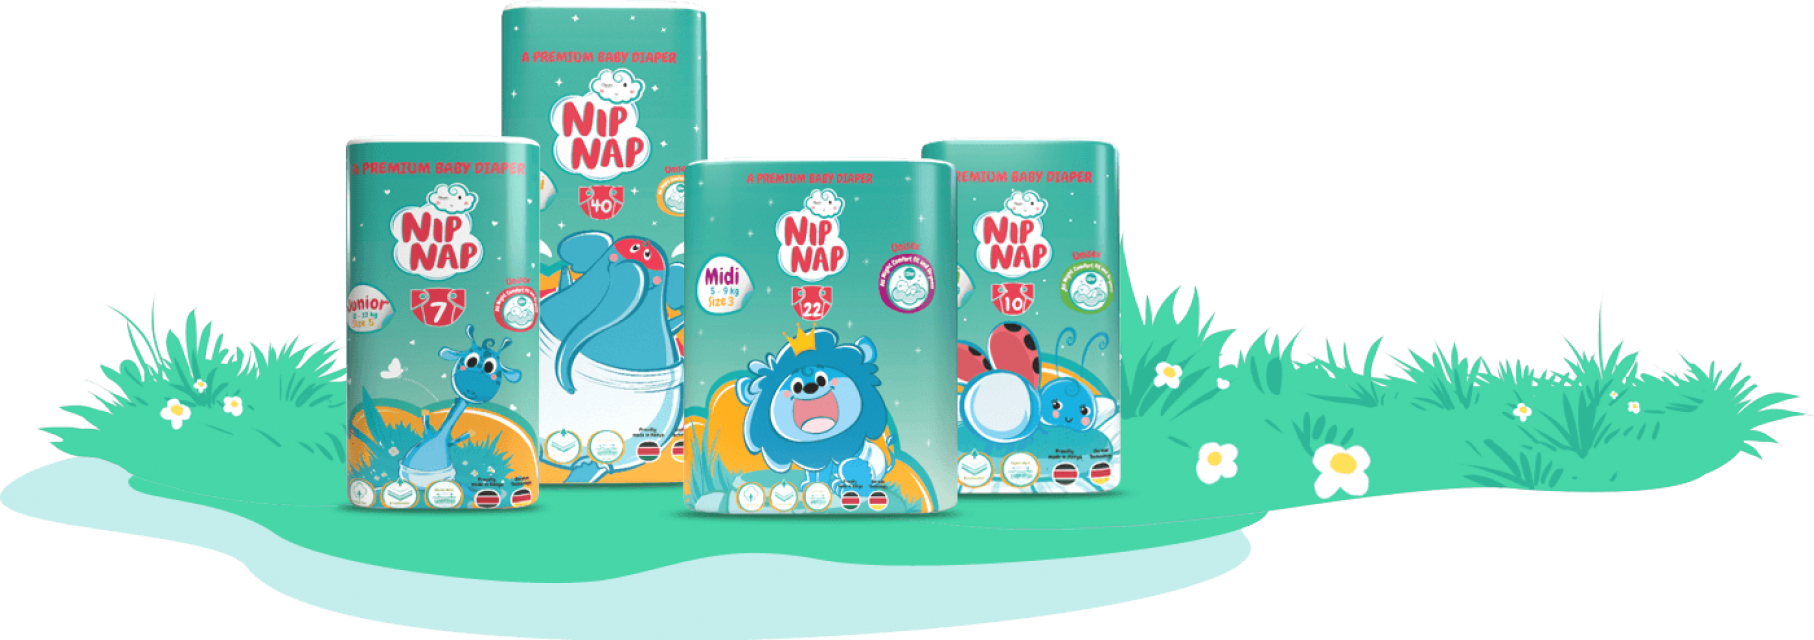 Nip Nap Premium Baby Diapers - 12-Hour Comfort for Your Little One